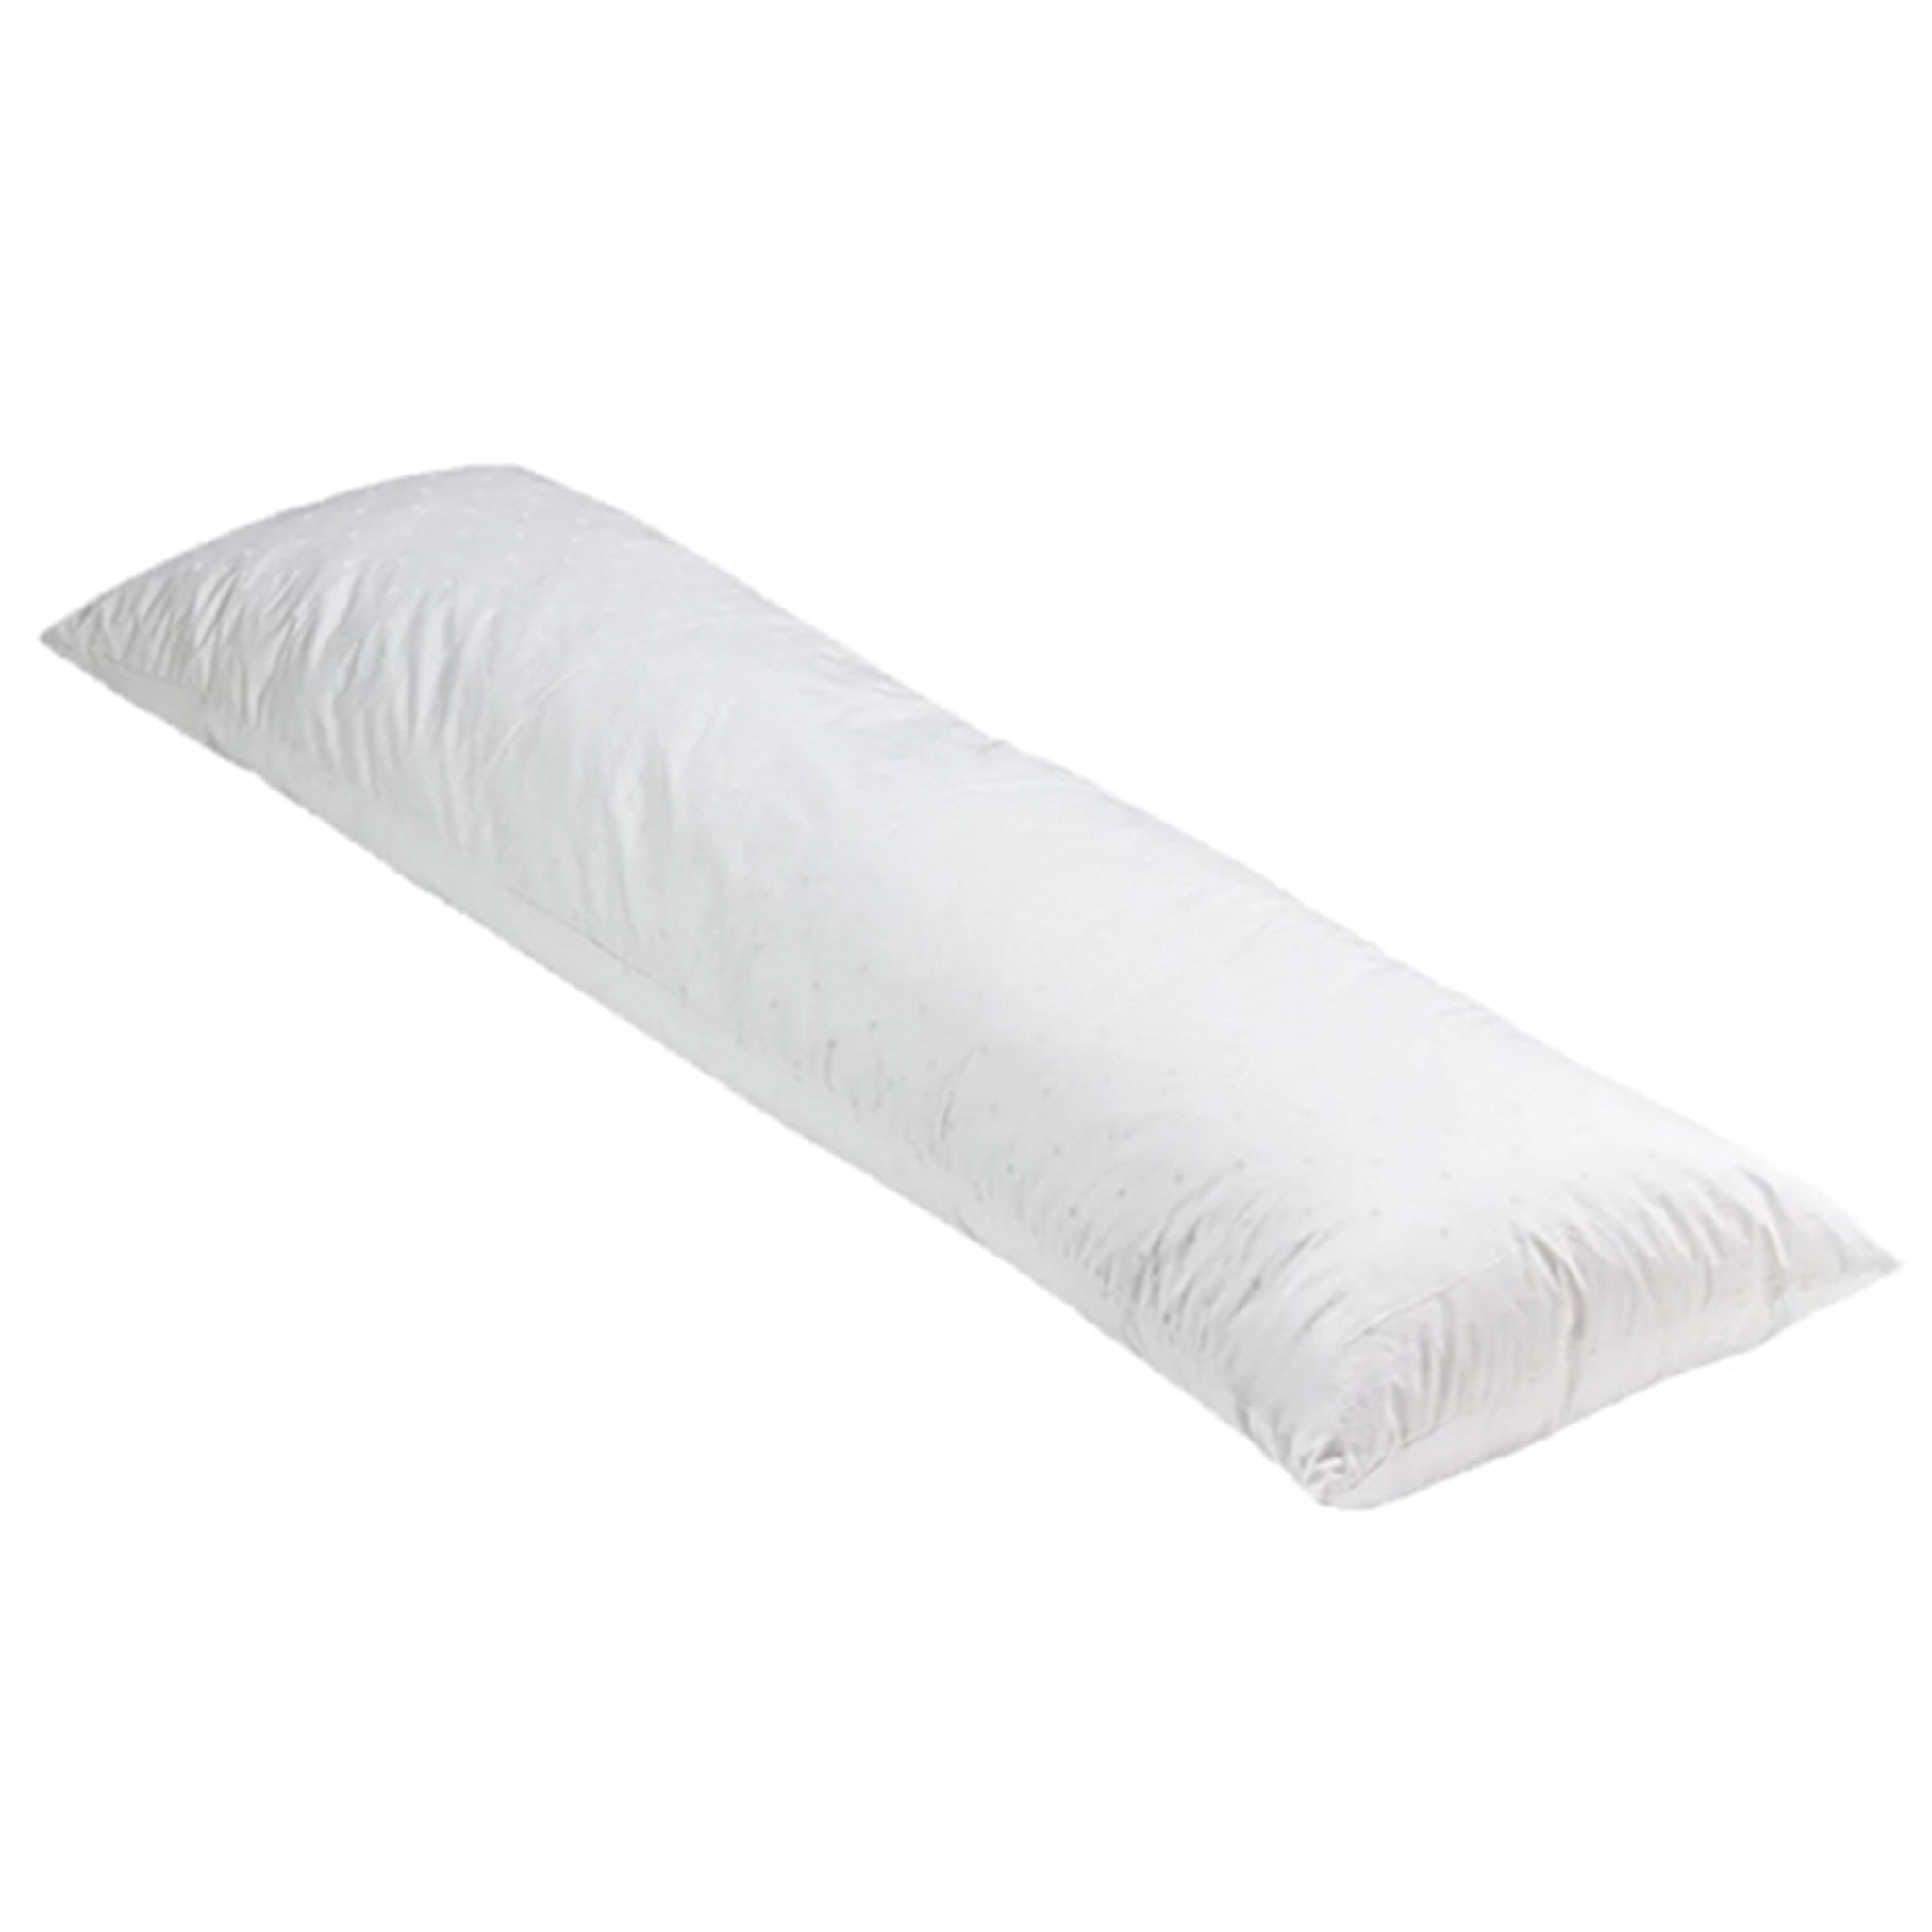 Fossflakes Comfort I-Pillow incl. Cover